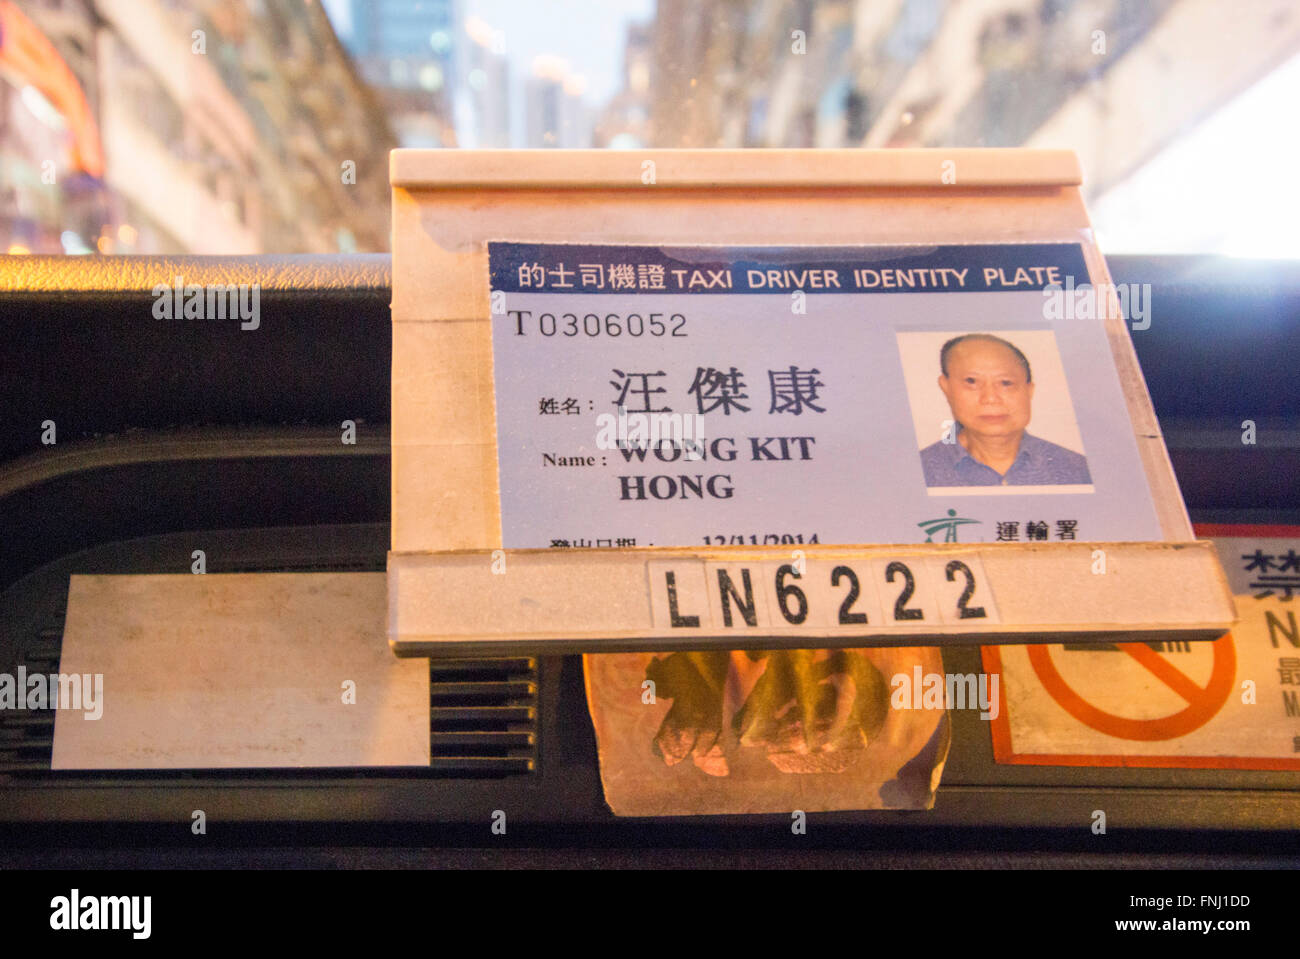 How can I report a taxi driver in Hong Kong with no plate and no